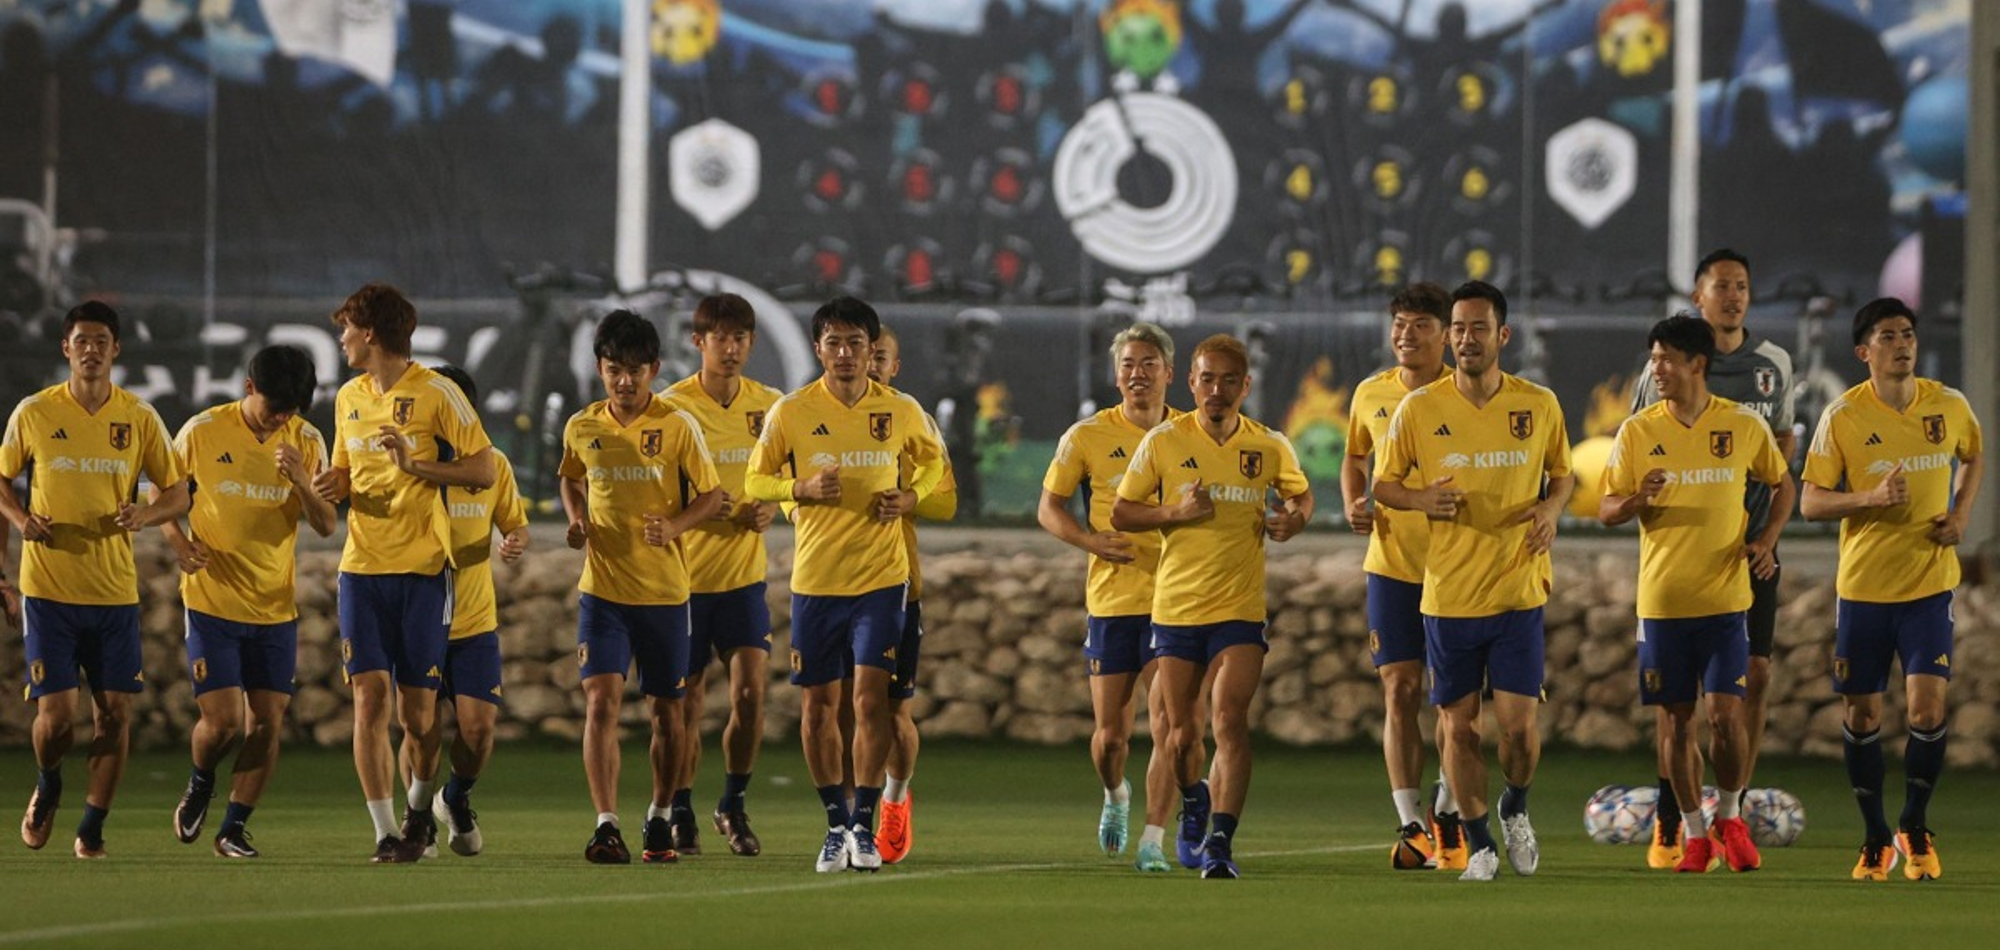 Pumped up and raring to go: World Cup teams continue to arrive, train in Doha